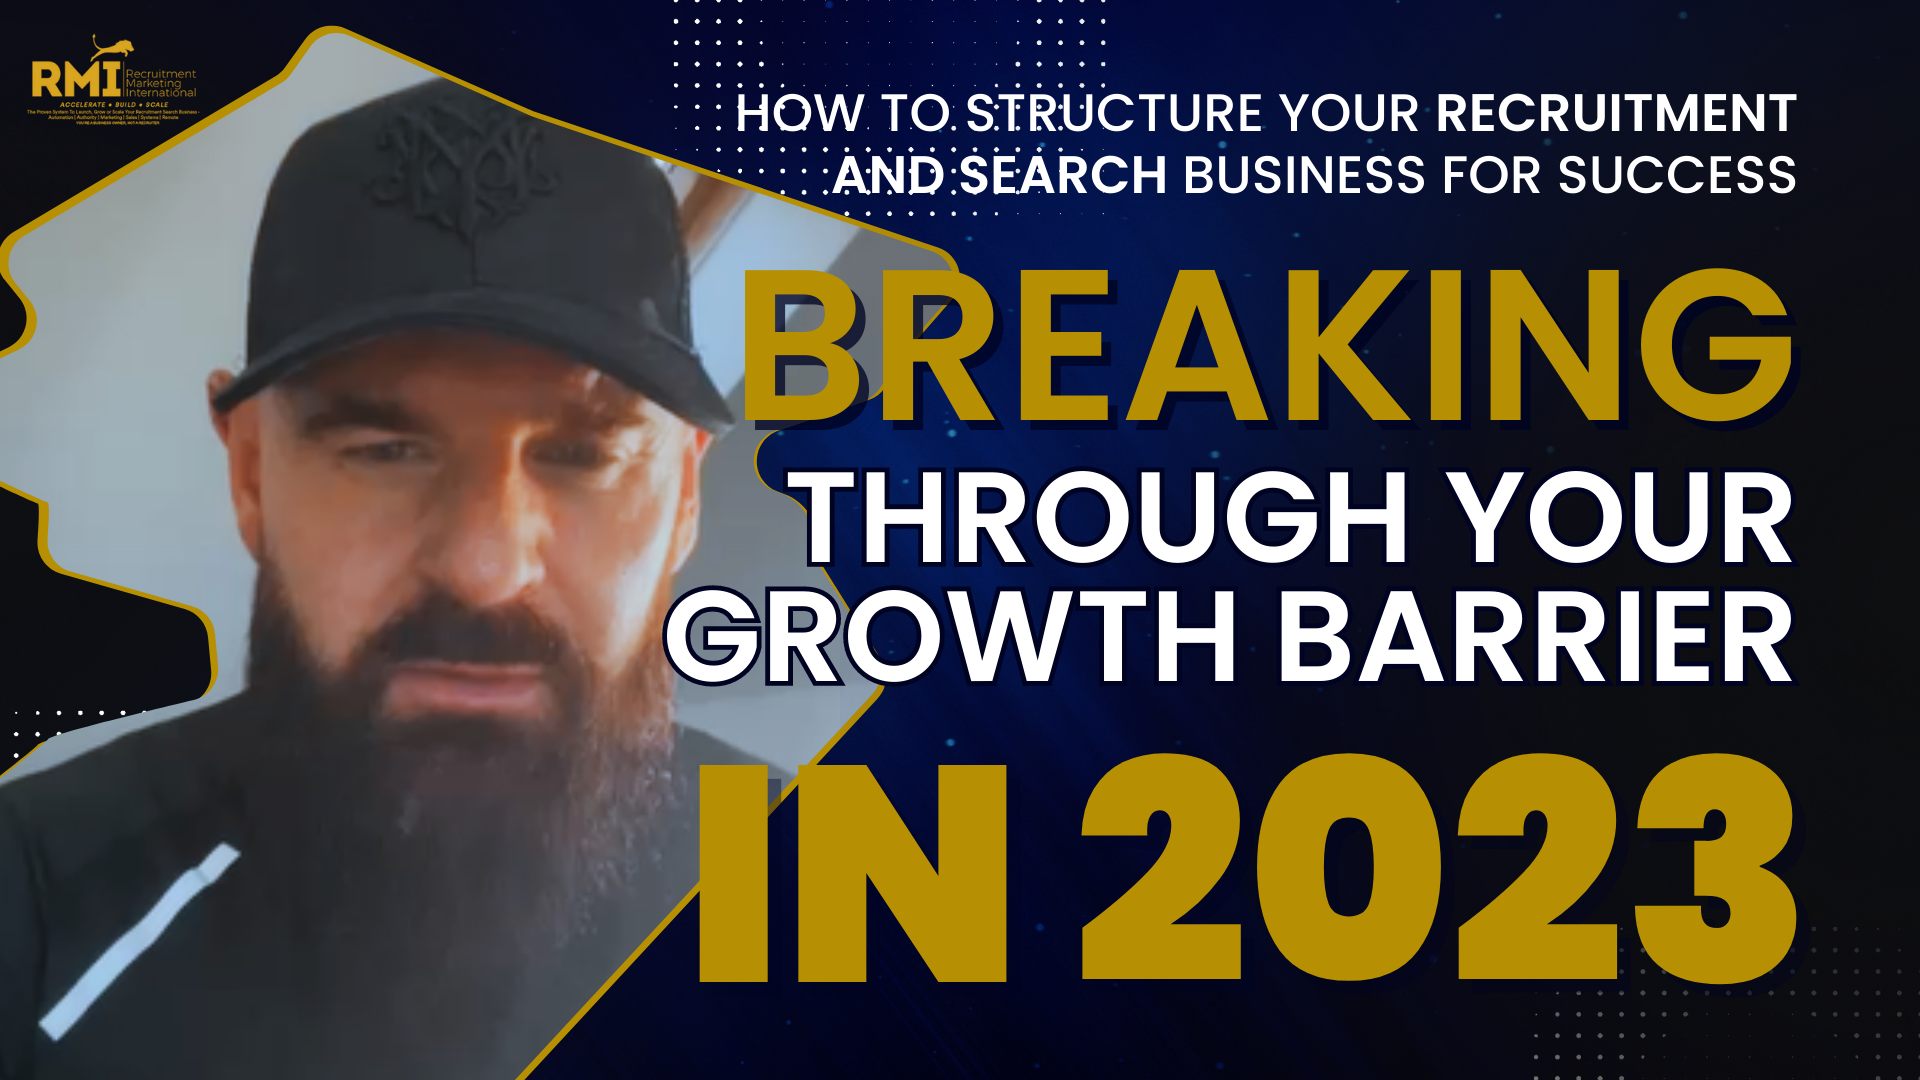 PODCAST 226 – BREAKING THROUGH YOUR GROWTH BARRIER IN 2023! – HOW TO STRUCTURE YOUR RECRUITMENT & SEARCH BUSINESS FOR SUCCESS